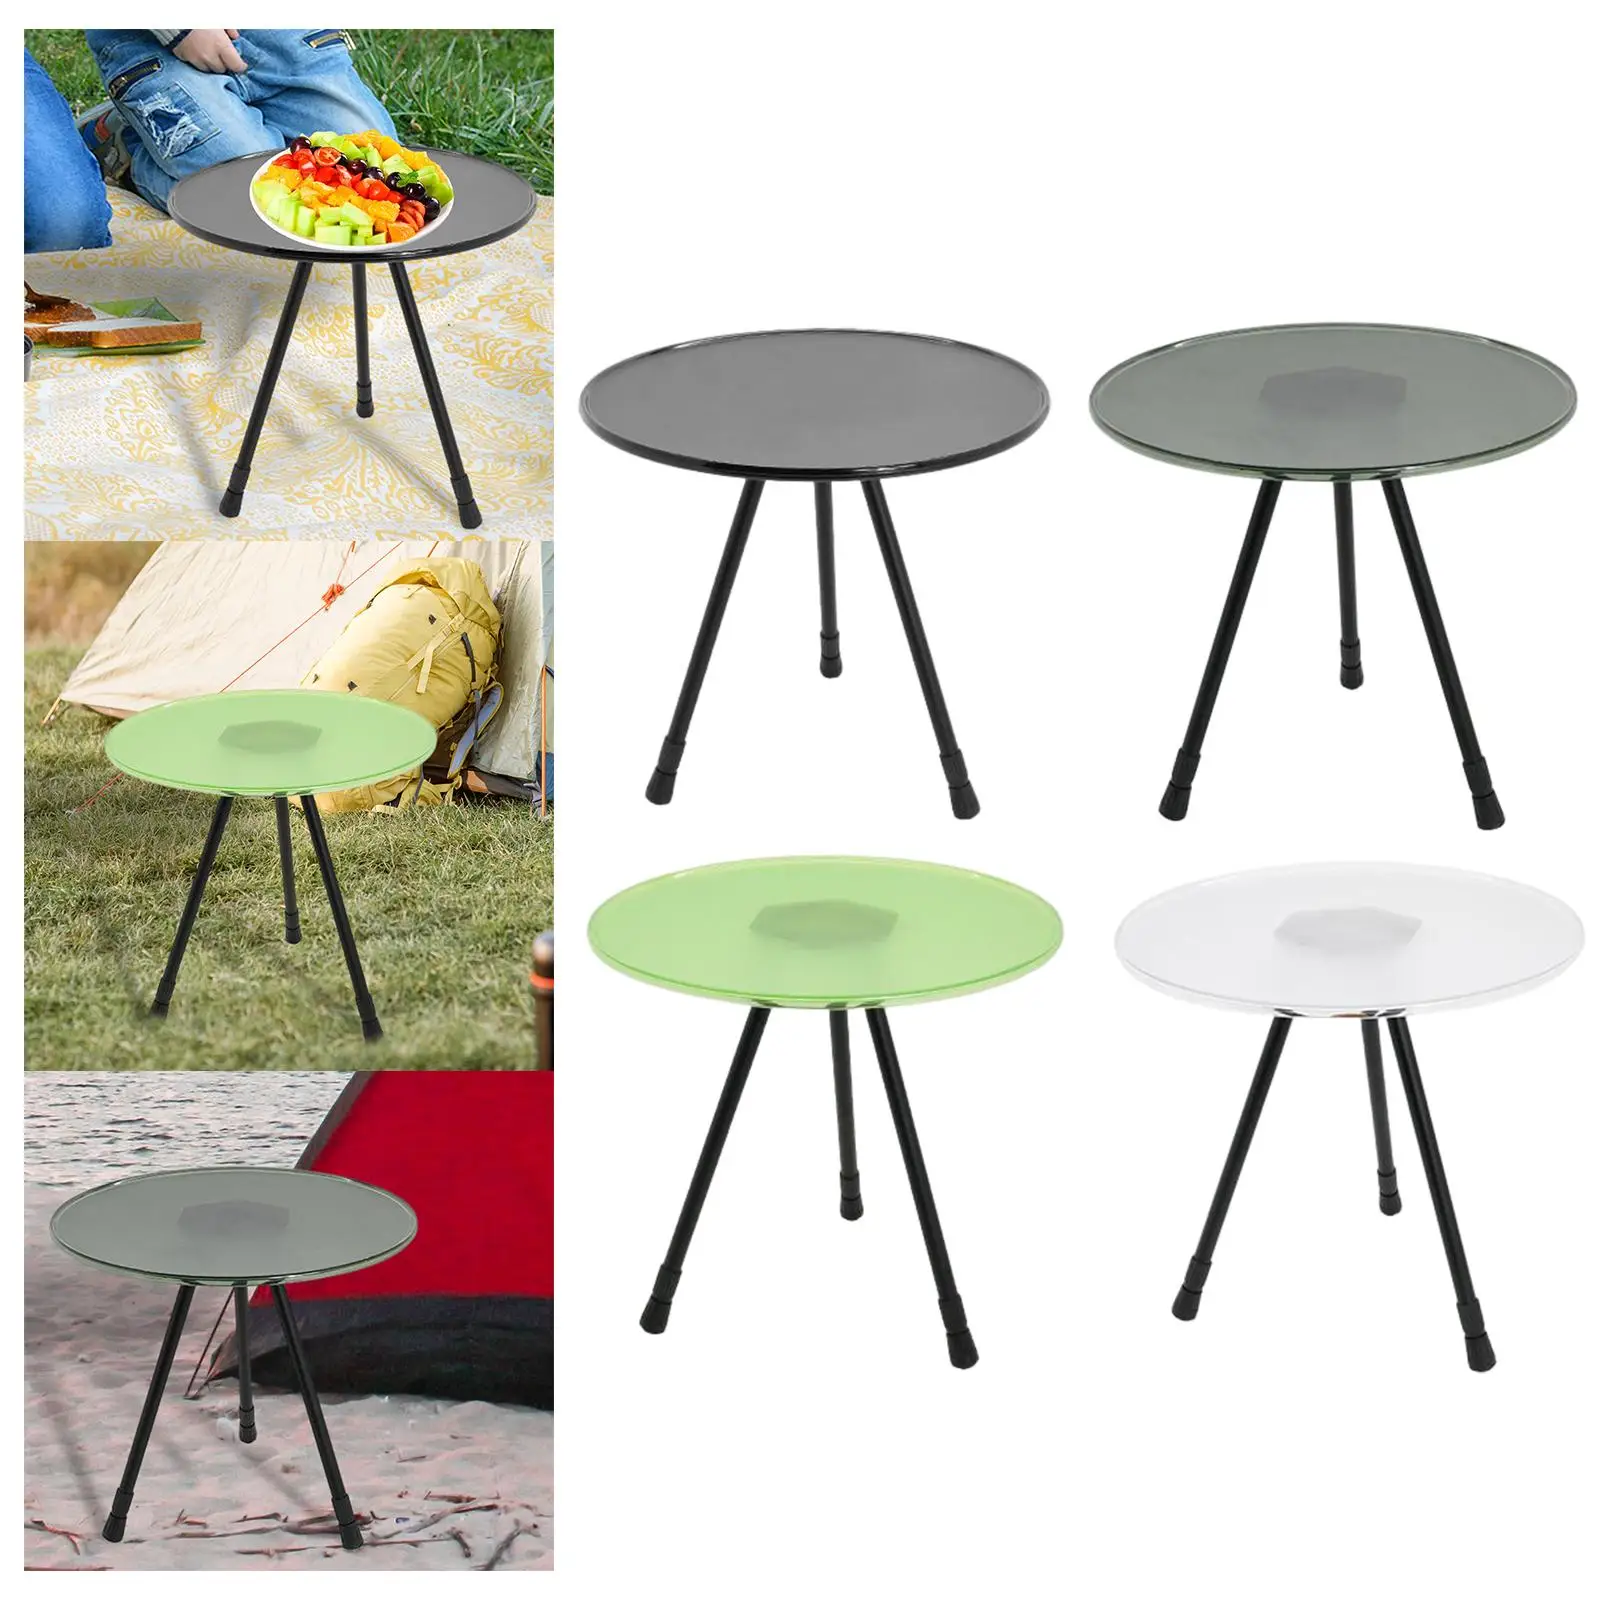 Three Legged Round Table Foldable Dining Desk for Hiking Fishing